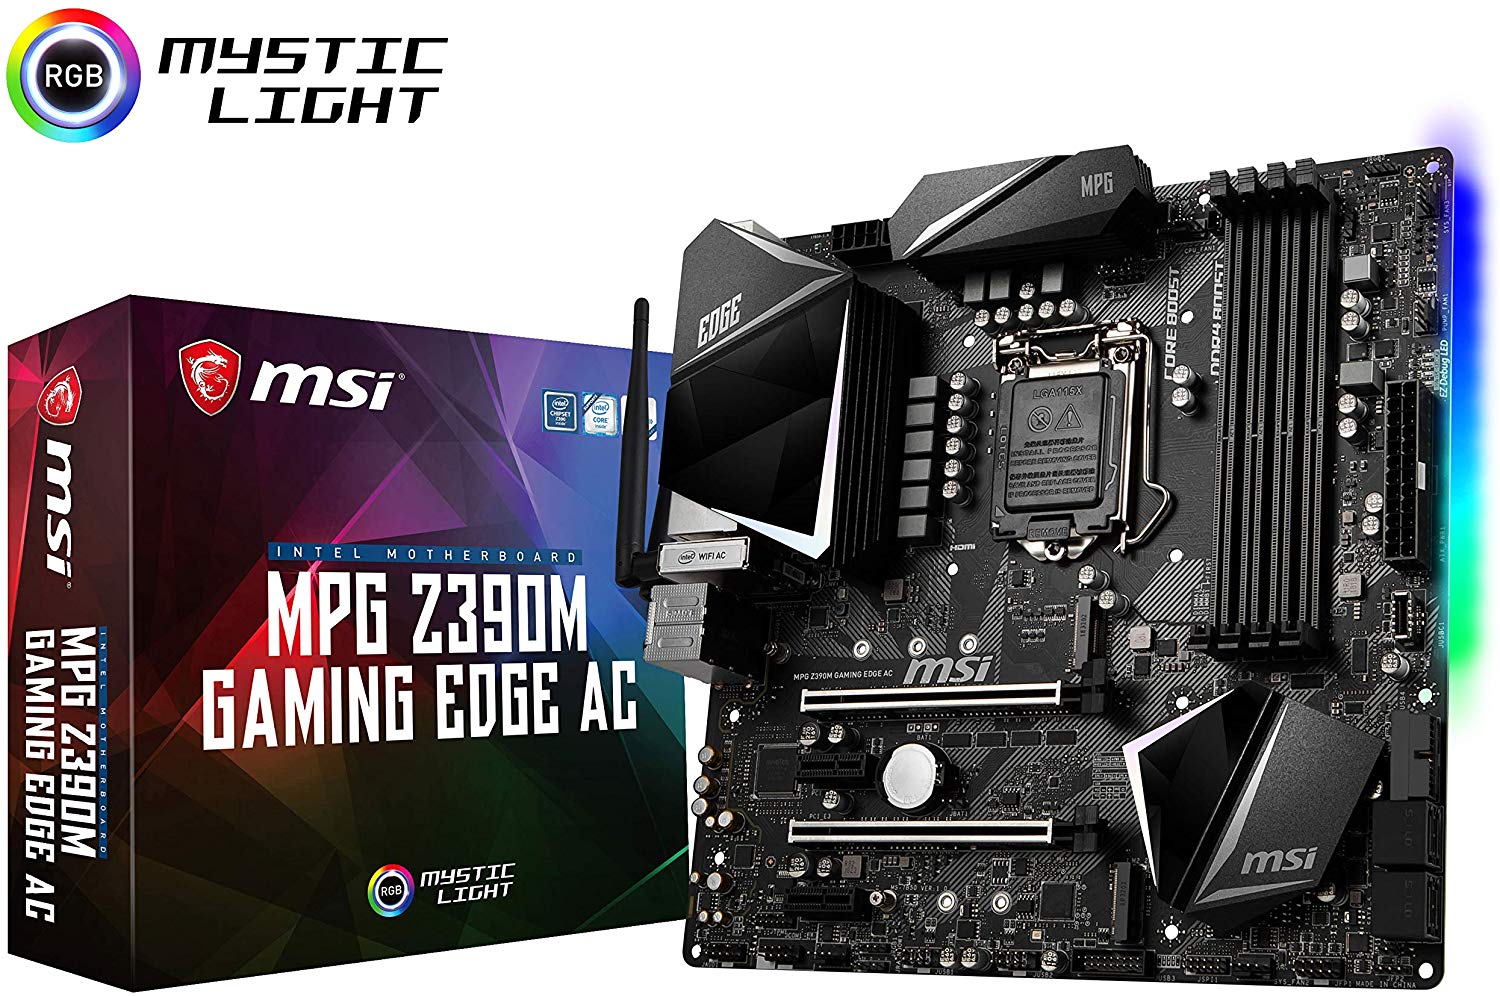 https://www.windowscentral.com/sites/wpcentral.com/files/field/image/2019/11/msi-mpg-z390m-gaming-edge-motherboard-cropped.jpg